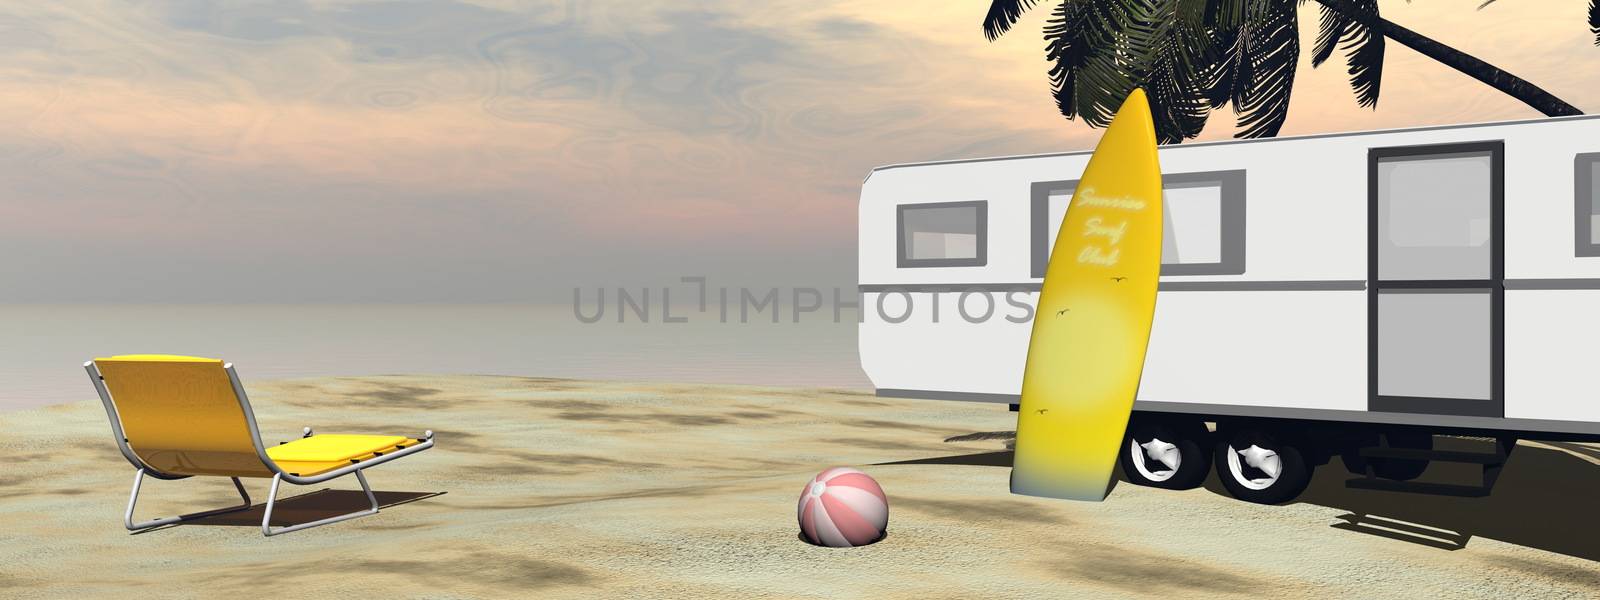 Caravan holidays at the beach, relaxing and surfing - 3D render